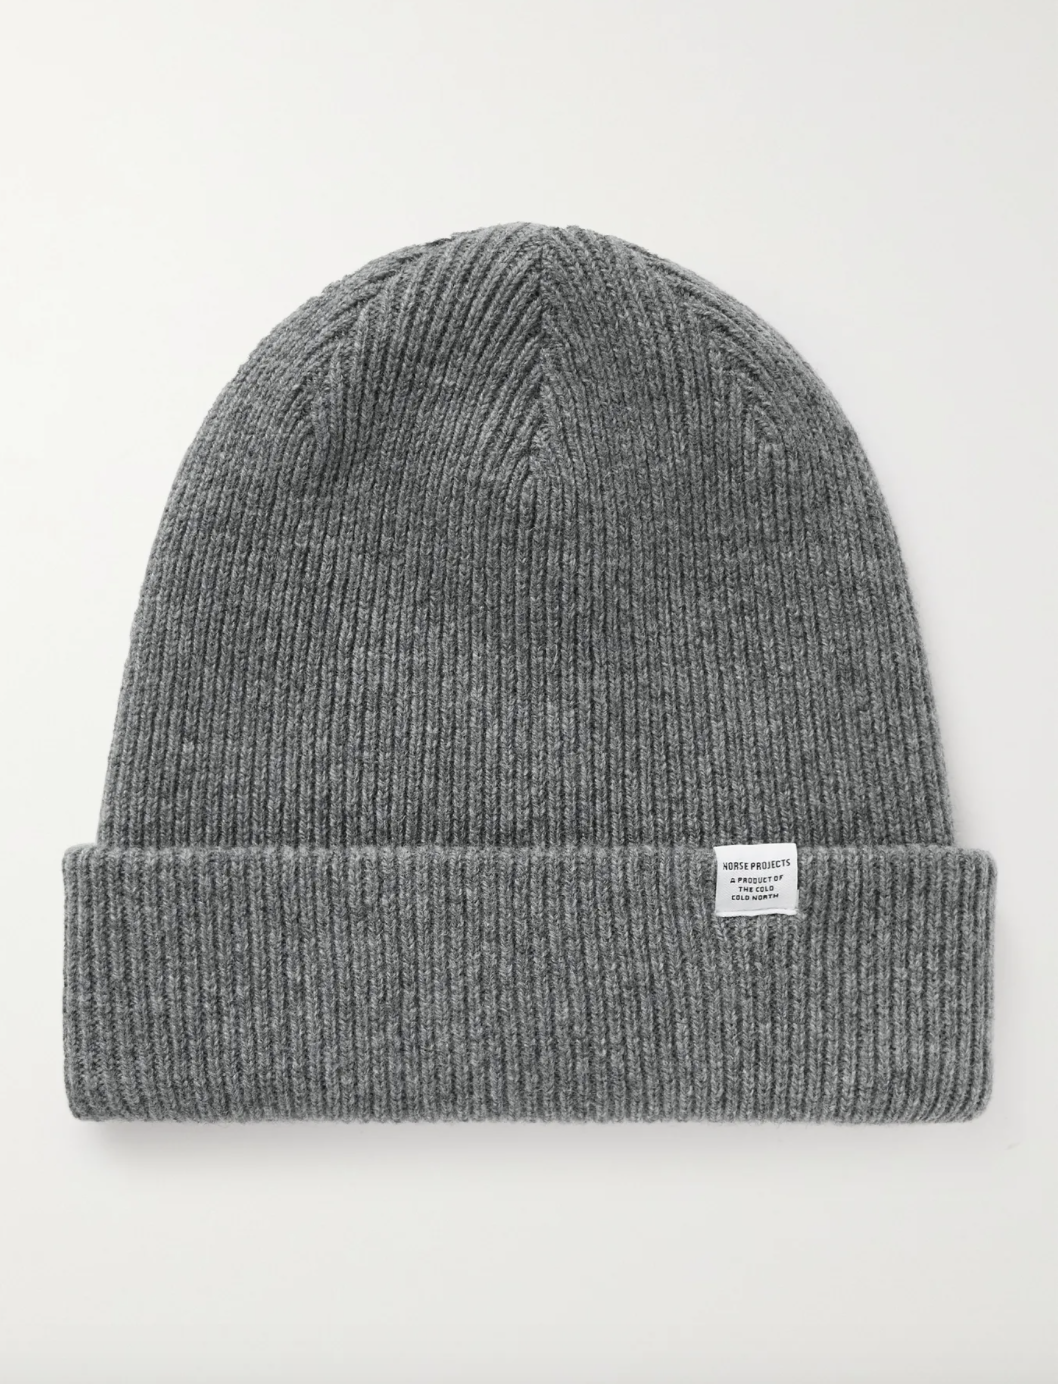 Mr Porter - Norse Projects Hat £55.00